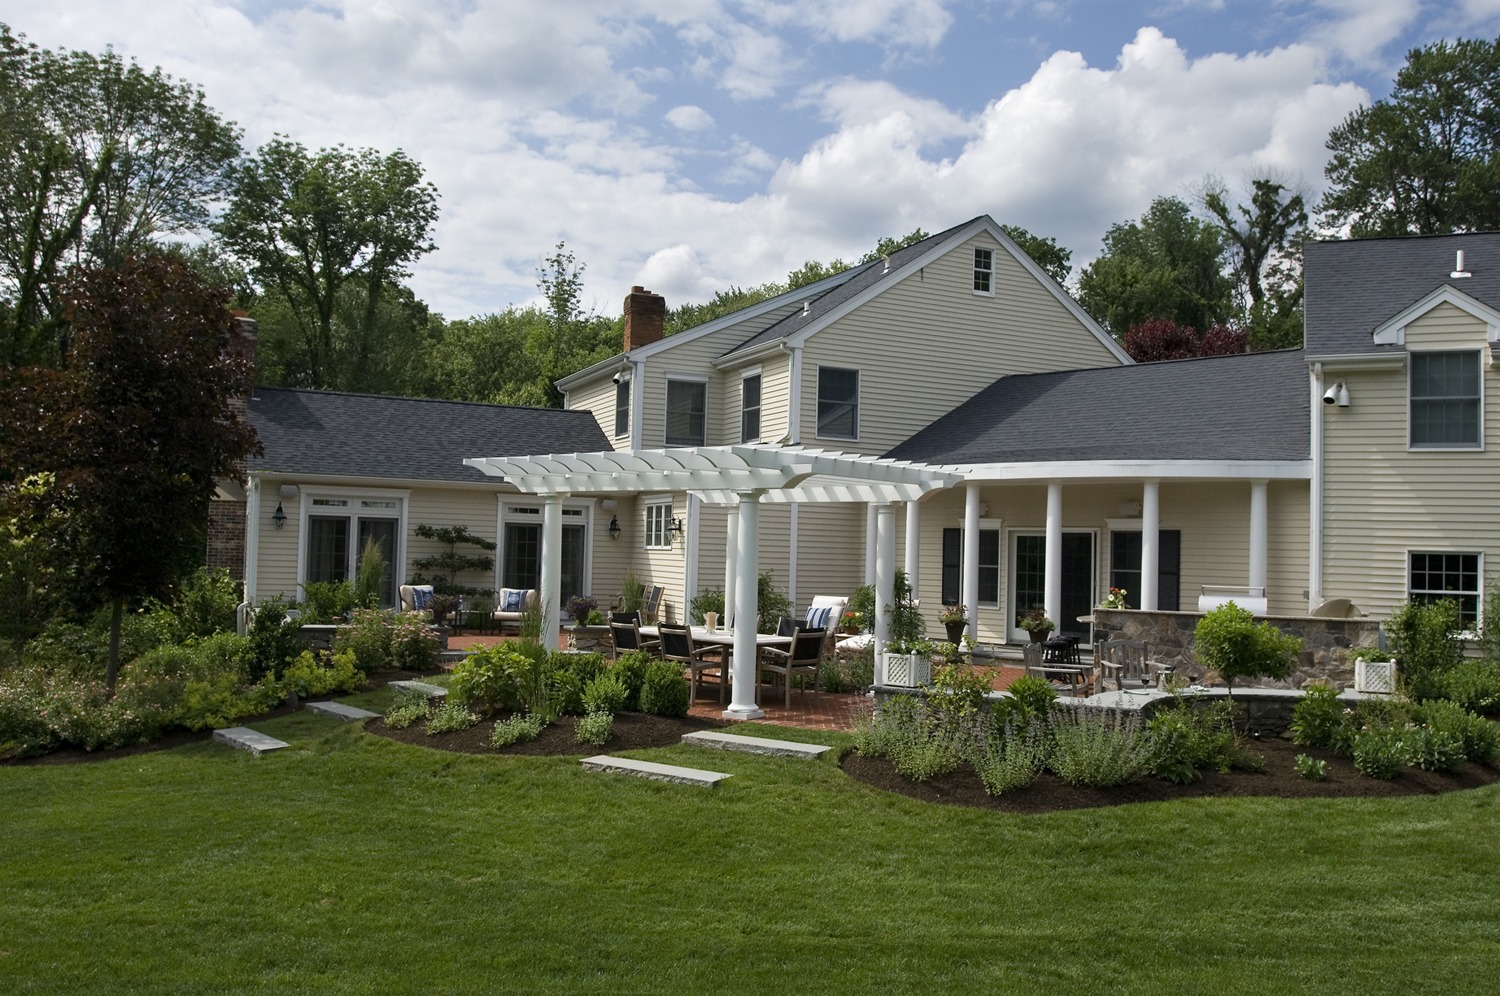 A traditional two-story house with beige siding features a covered patio area, manicured lawn, landscaped garden beds, and a pergola structure.